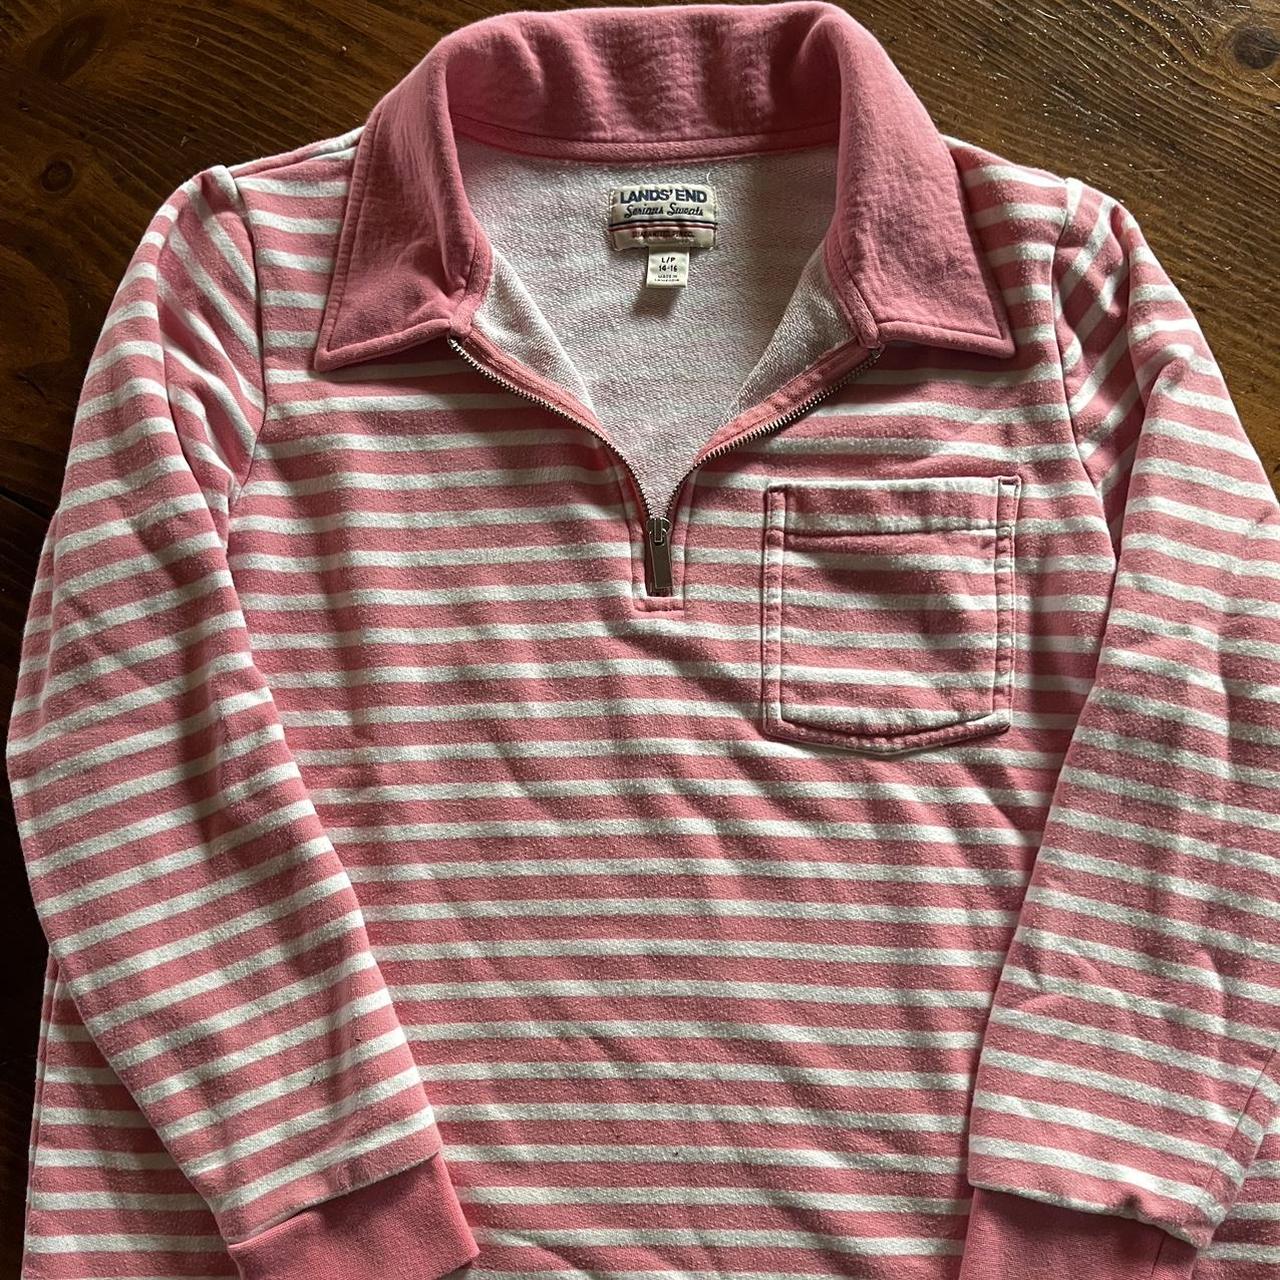 Lands End Serious Sweats line, pink & white striped - Depop